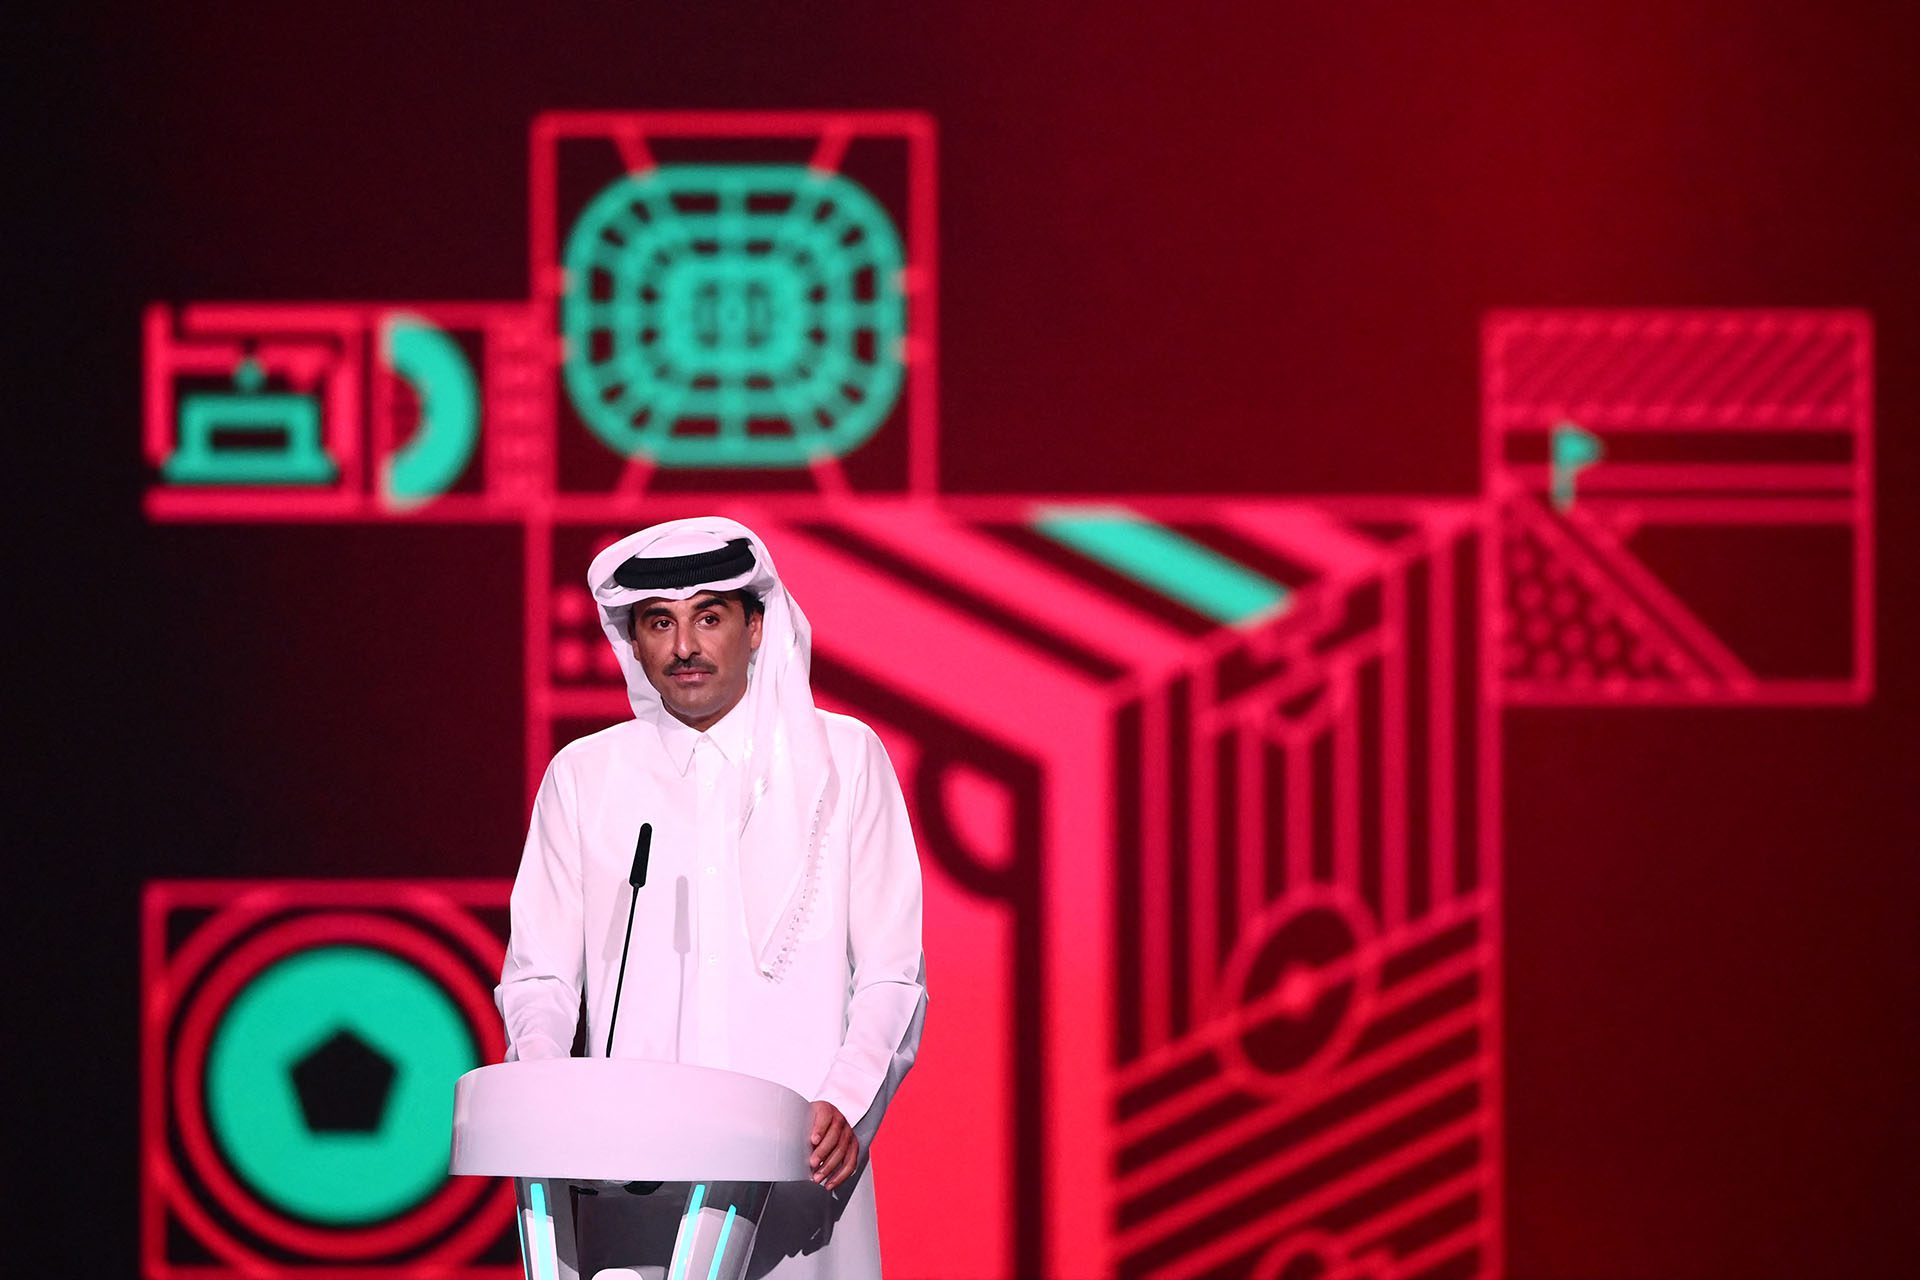 The Emir of Qatar, Sheikh Tamim bin Hamad Al Thani, during the draw for the 2022 World Cup in Qatar, at the Doha Convention and Exhibition Centre, April 1, 2022.